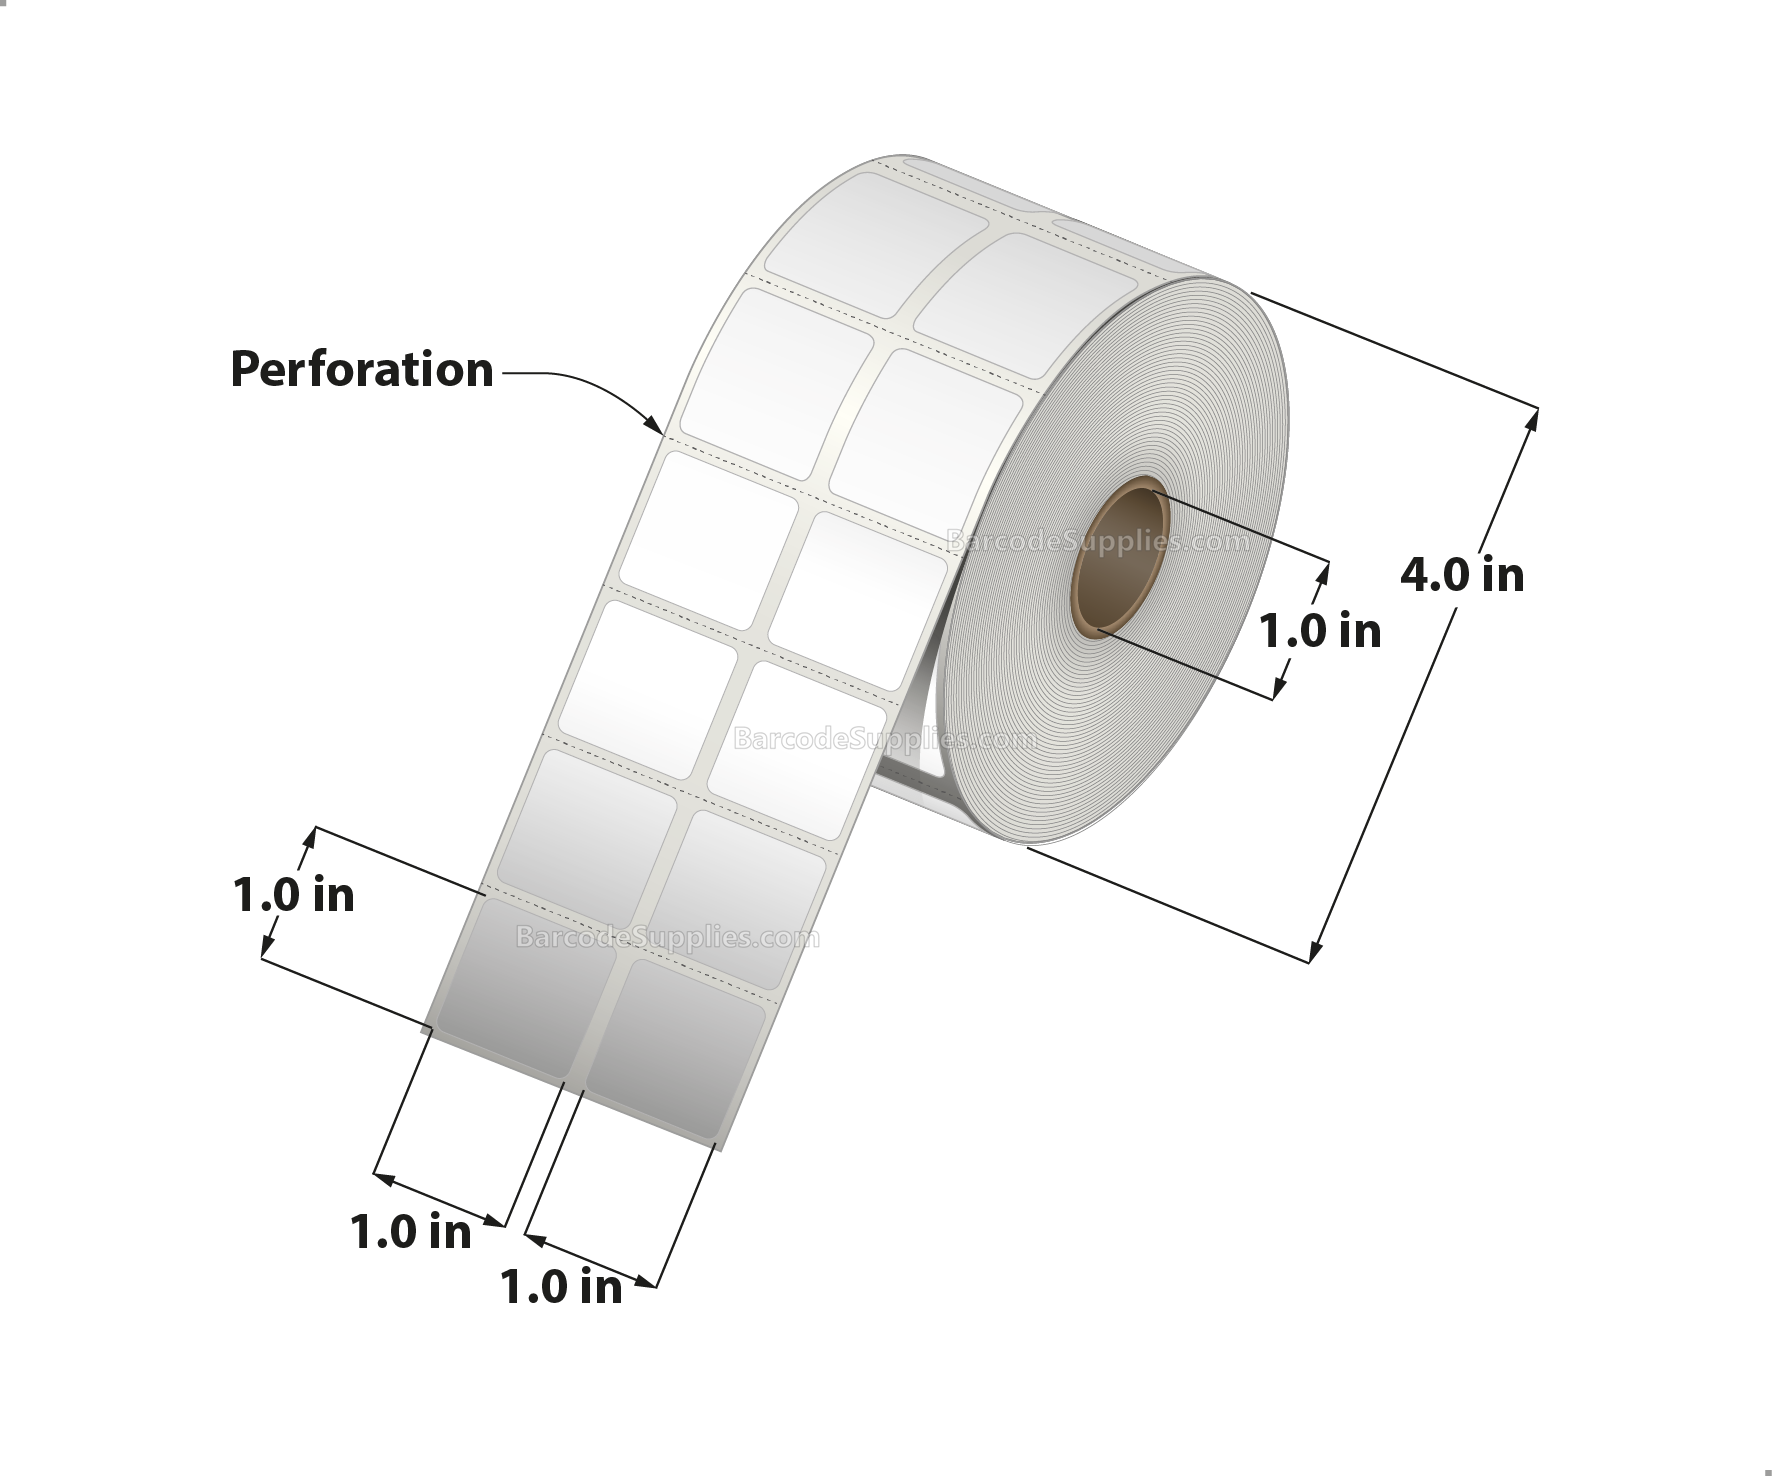 1 x 1 Direct Thermal White Labels With Acrylic Adhesive - Perforated - 2750 Labels Per Roll - Carton Of 12 Rolls - 33000 Labels Total - MPN: RD-1-1-2750-1